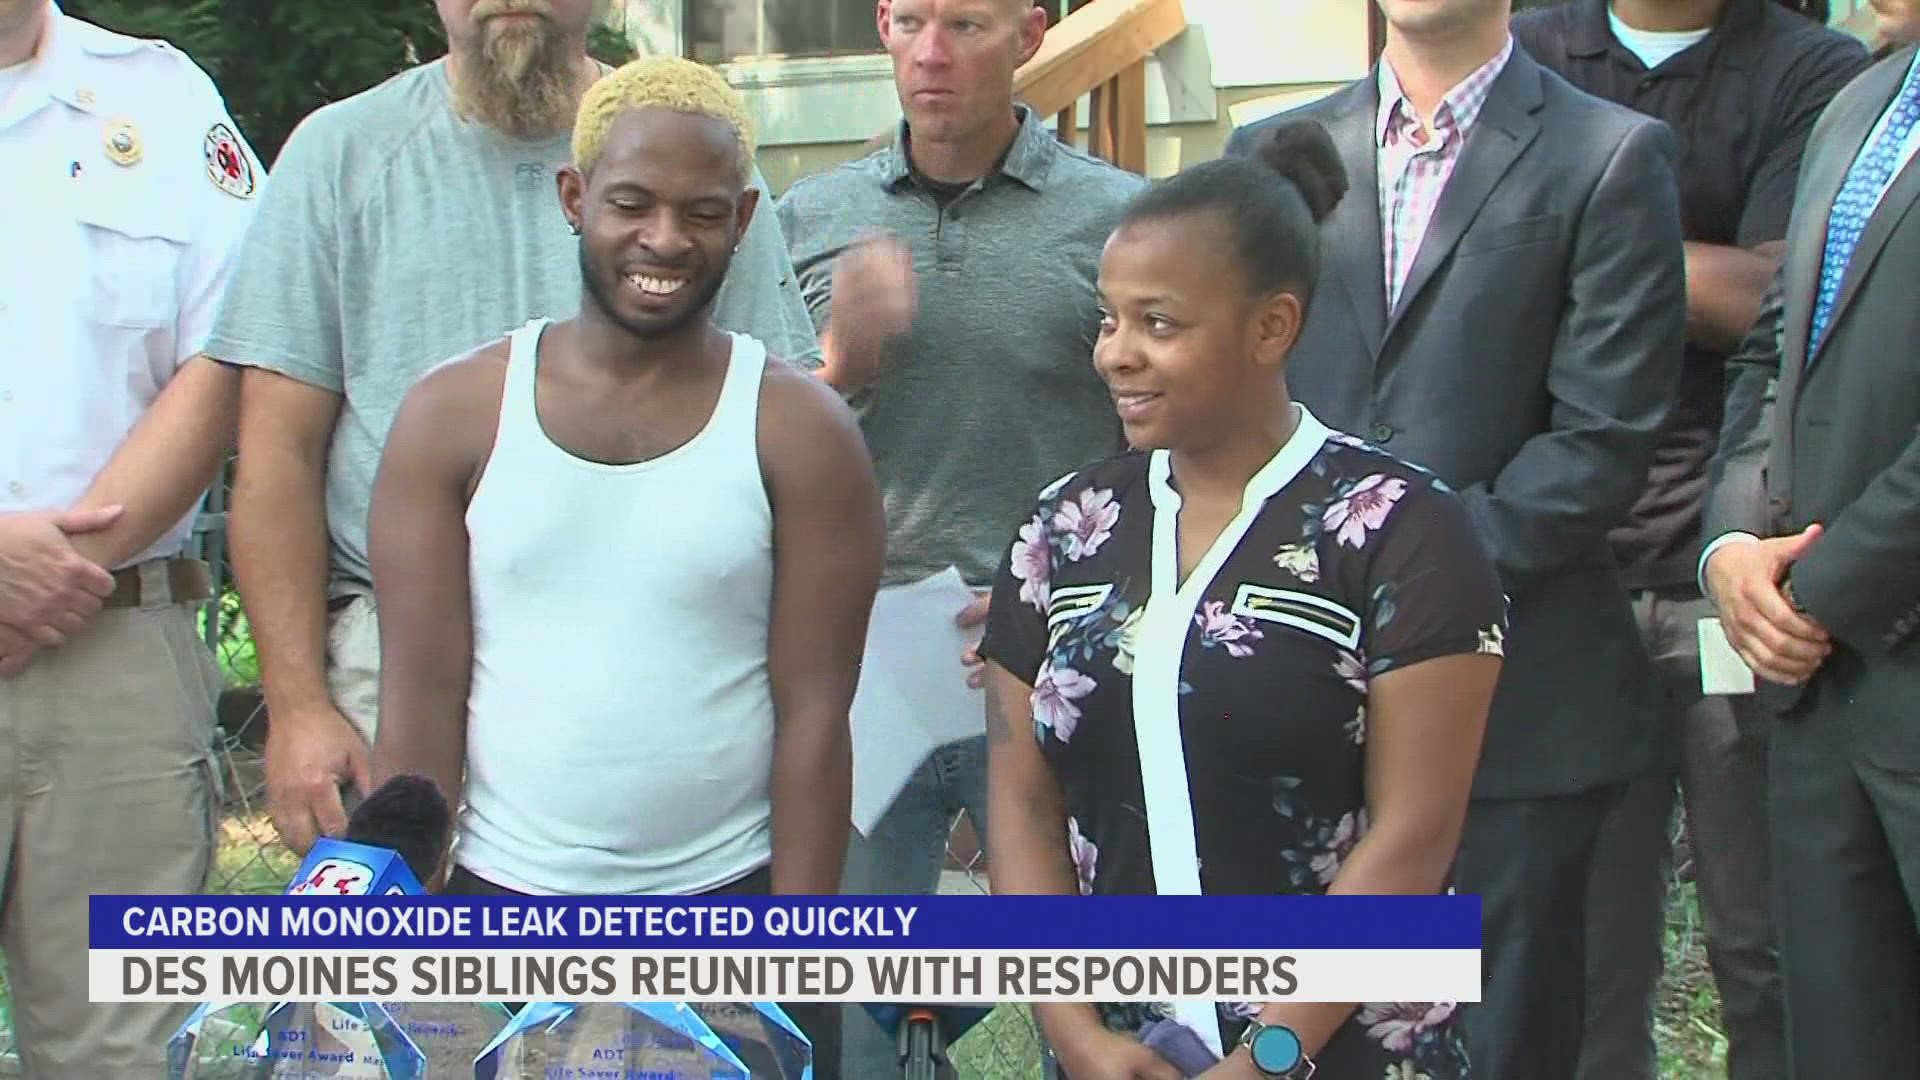 The siblings Reda Stajcar and Kenny Ayers are beyond grateful their lives were saved by their heros.